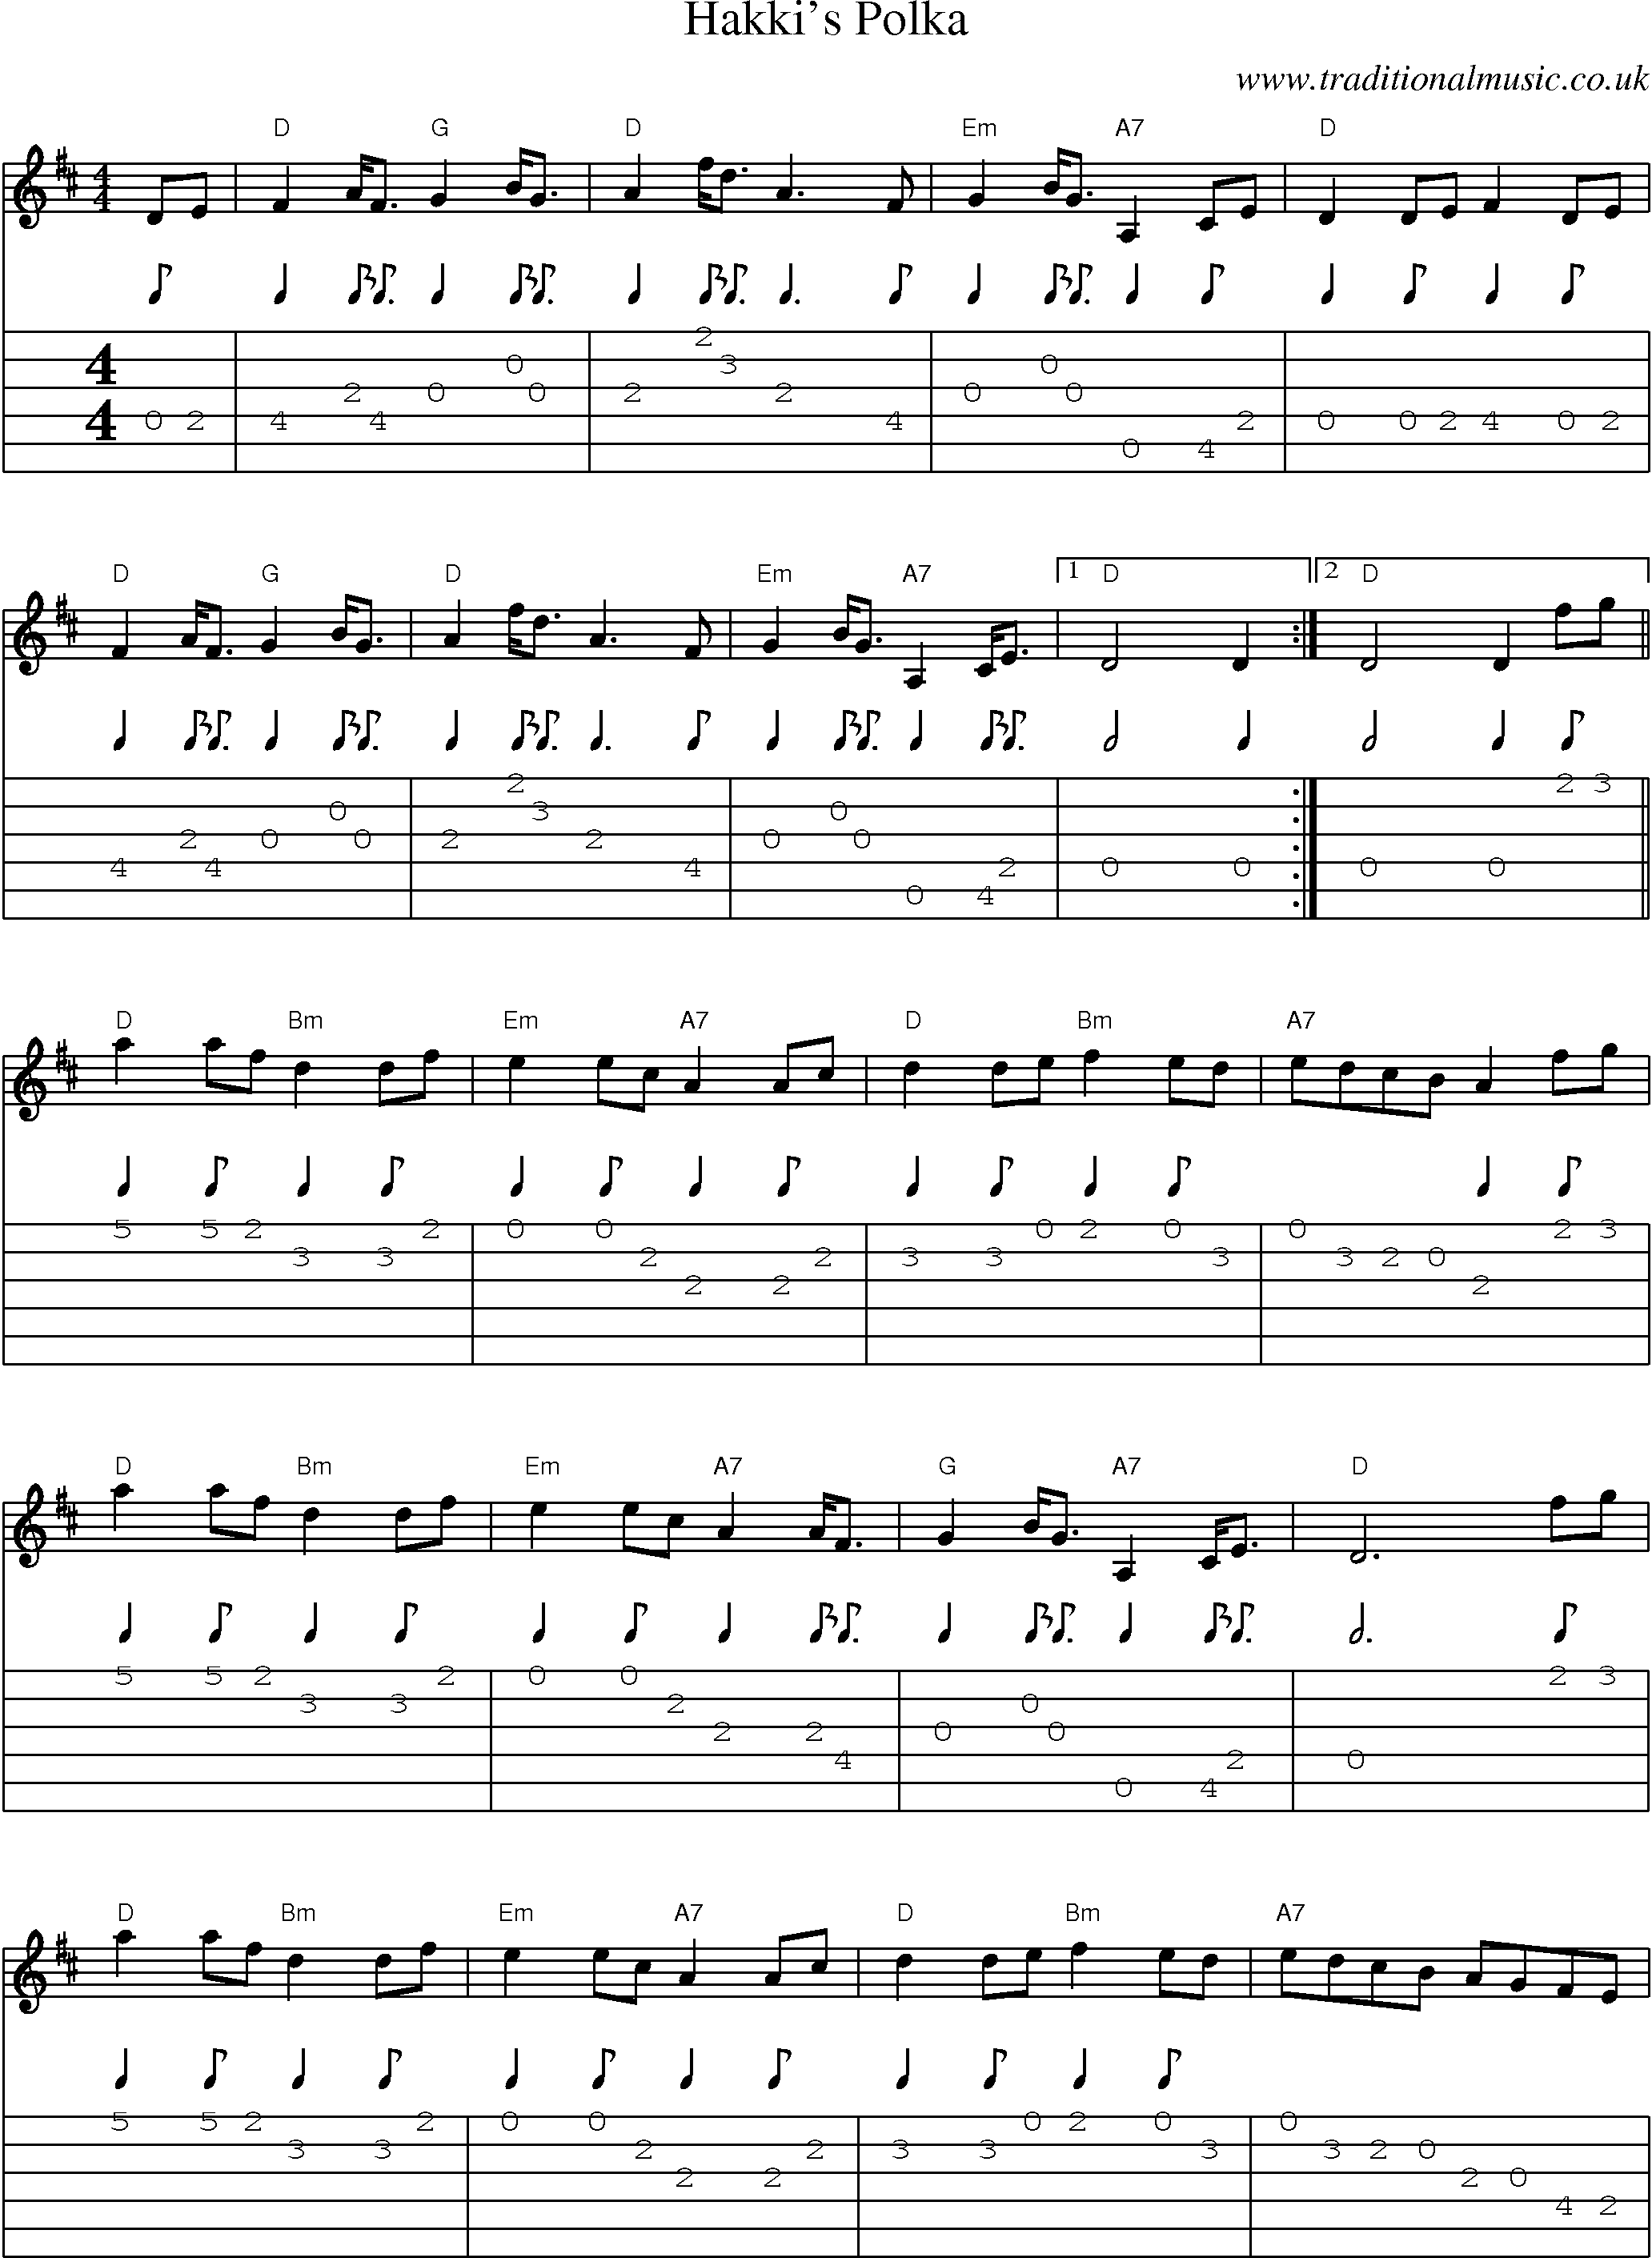 Music Score and Guitar Tabs for Hakkis Polka